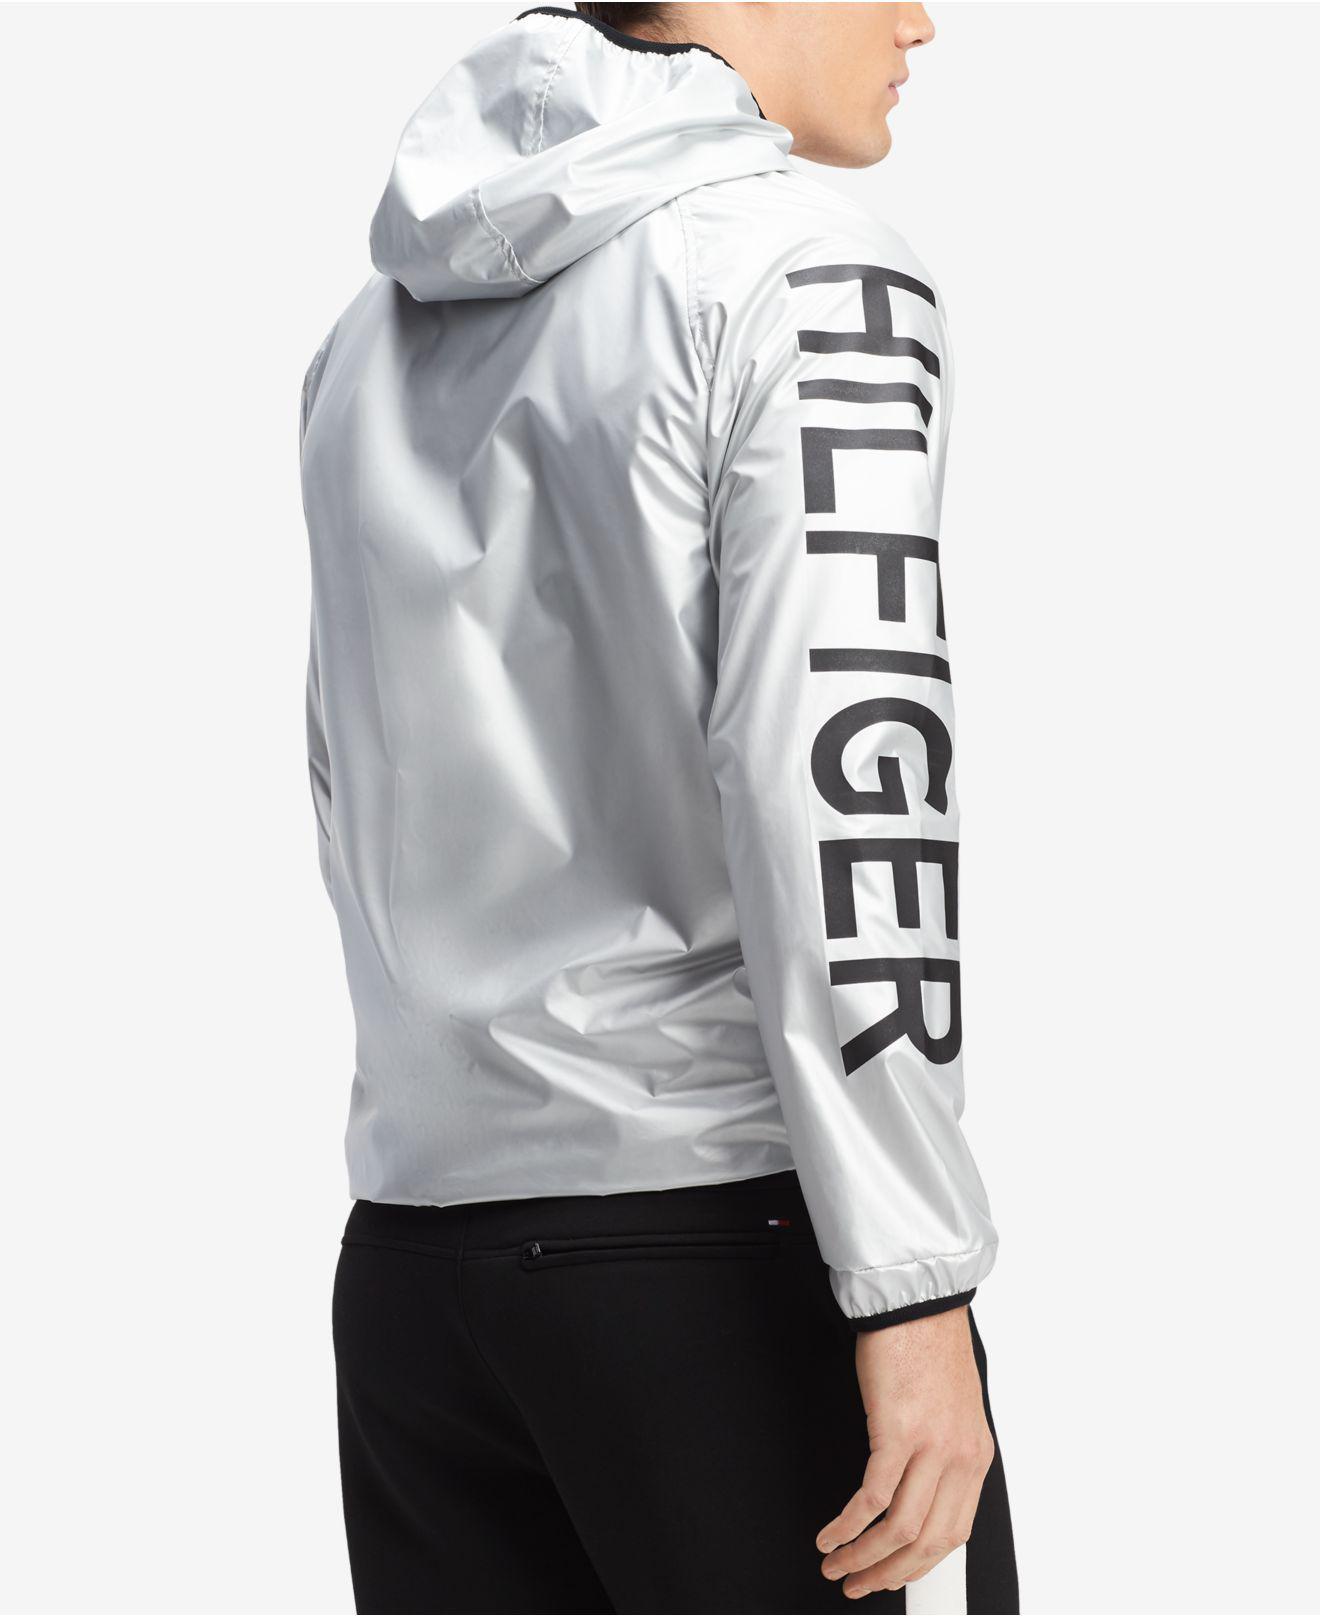 tommy hilfiger reflective jacket OFF 70% - Online Shopping Site for Fashion  & Lifestyle.